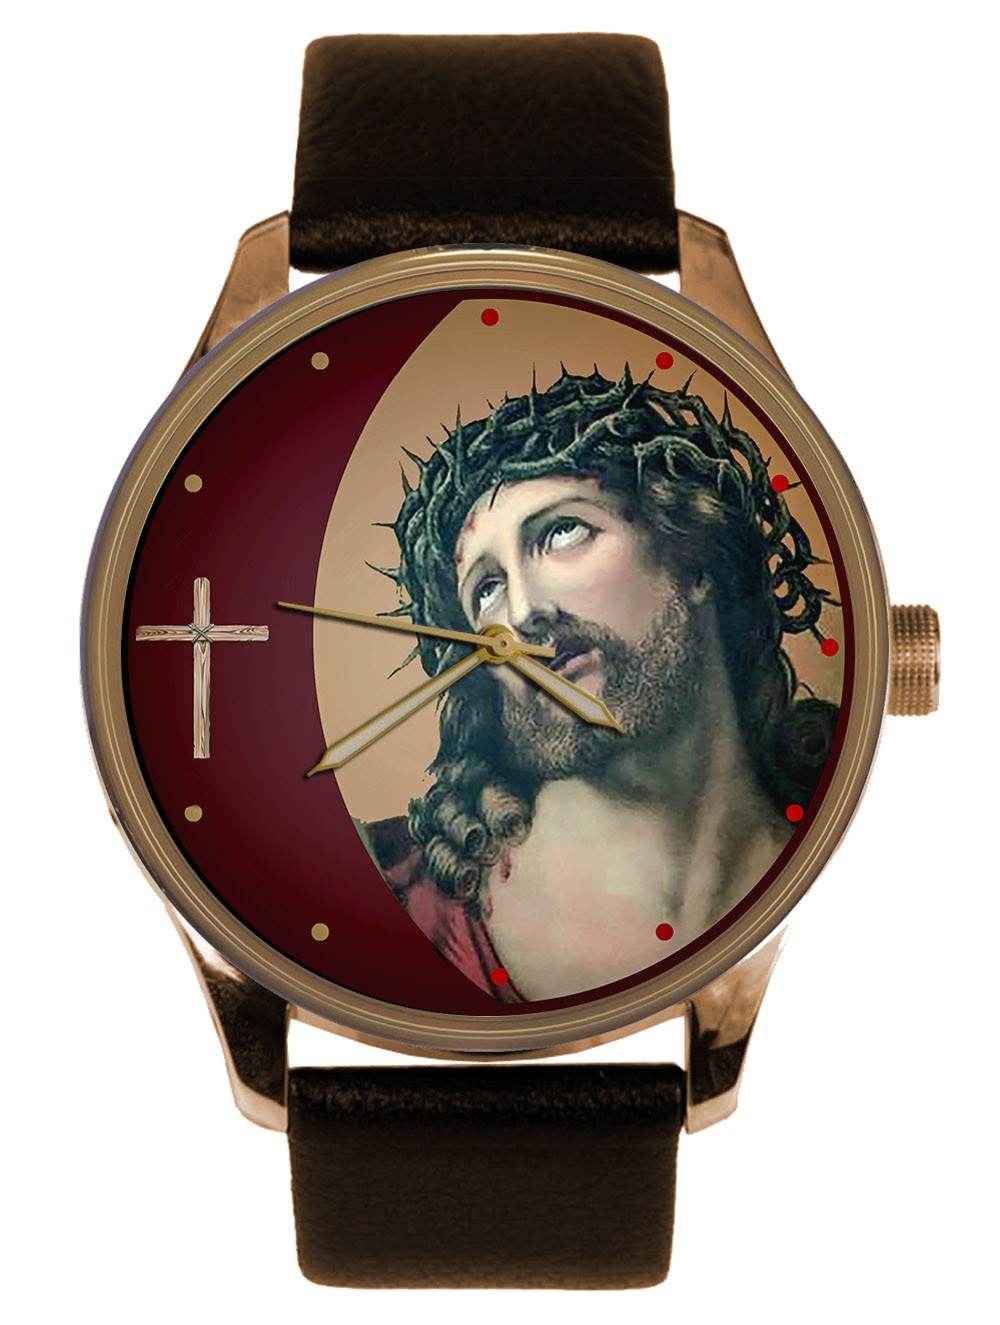 CHRIST Stainless Steel Ladies Watch with Date / Ref 80100/Caliber Ronda 1 |  eBay